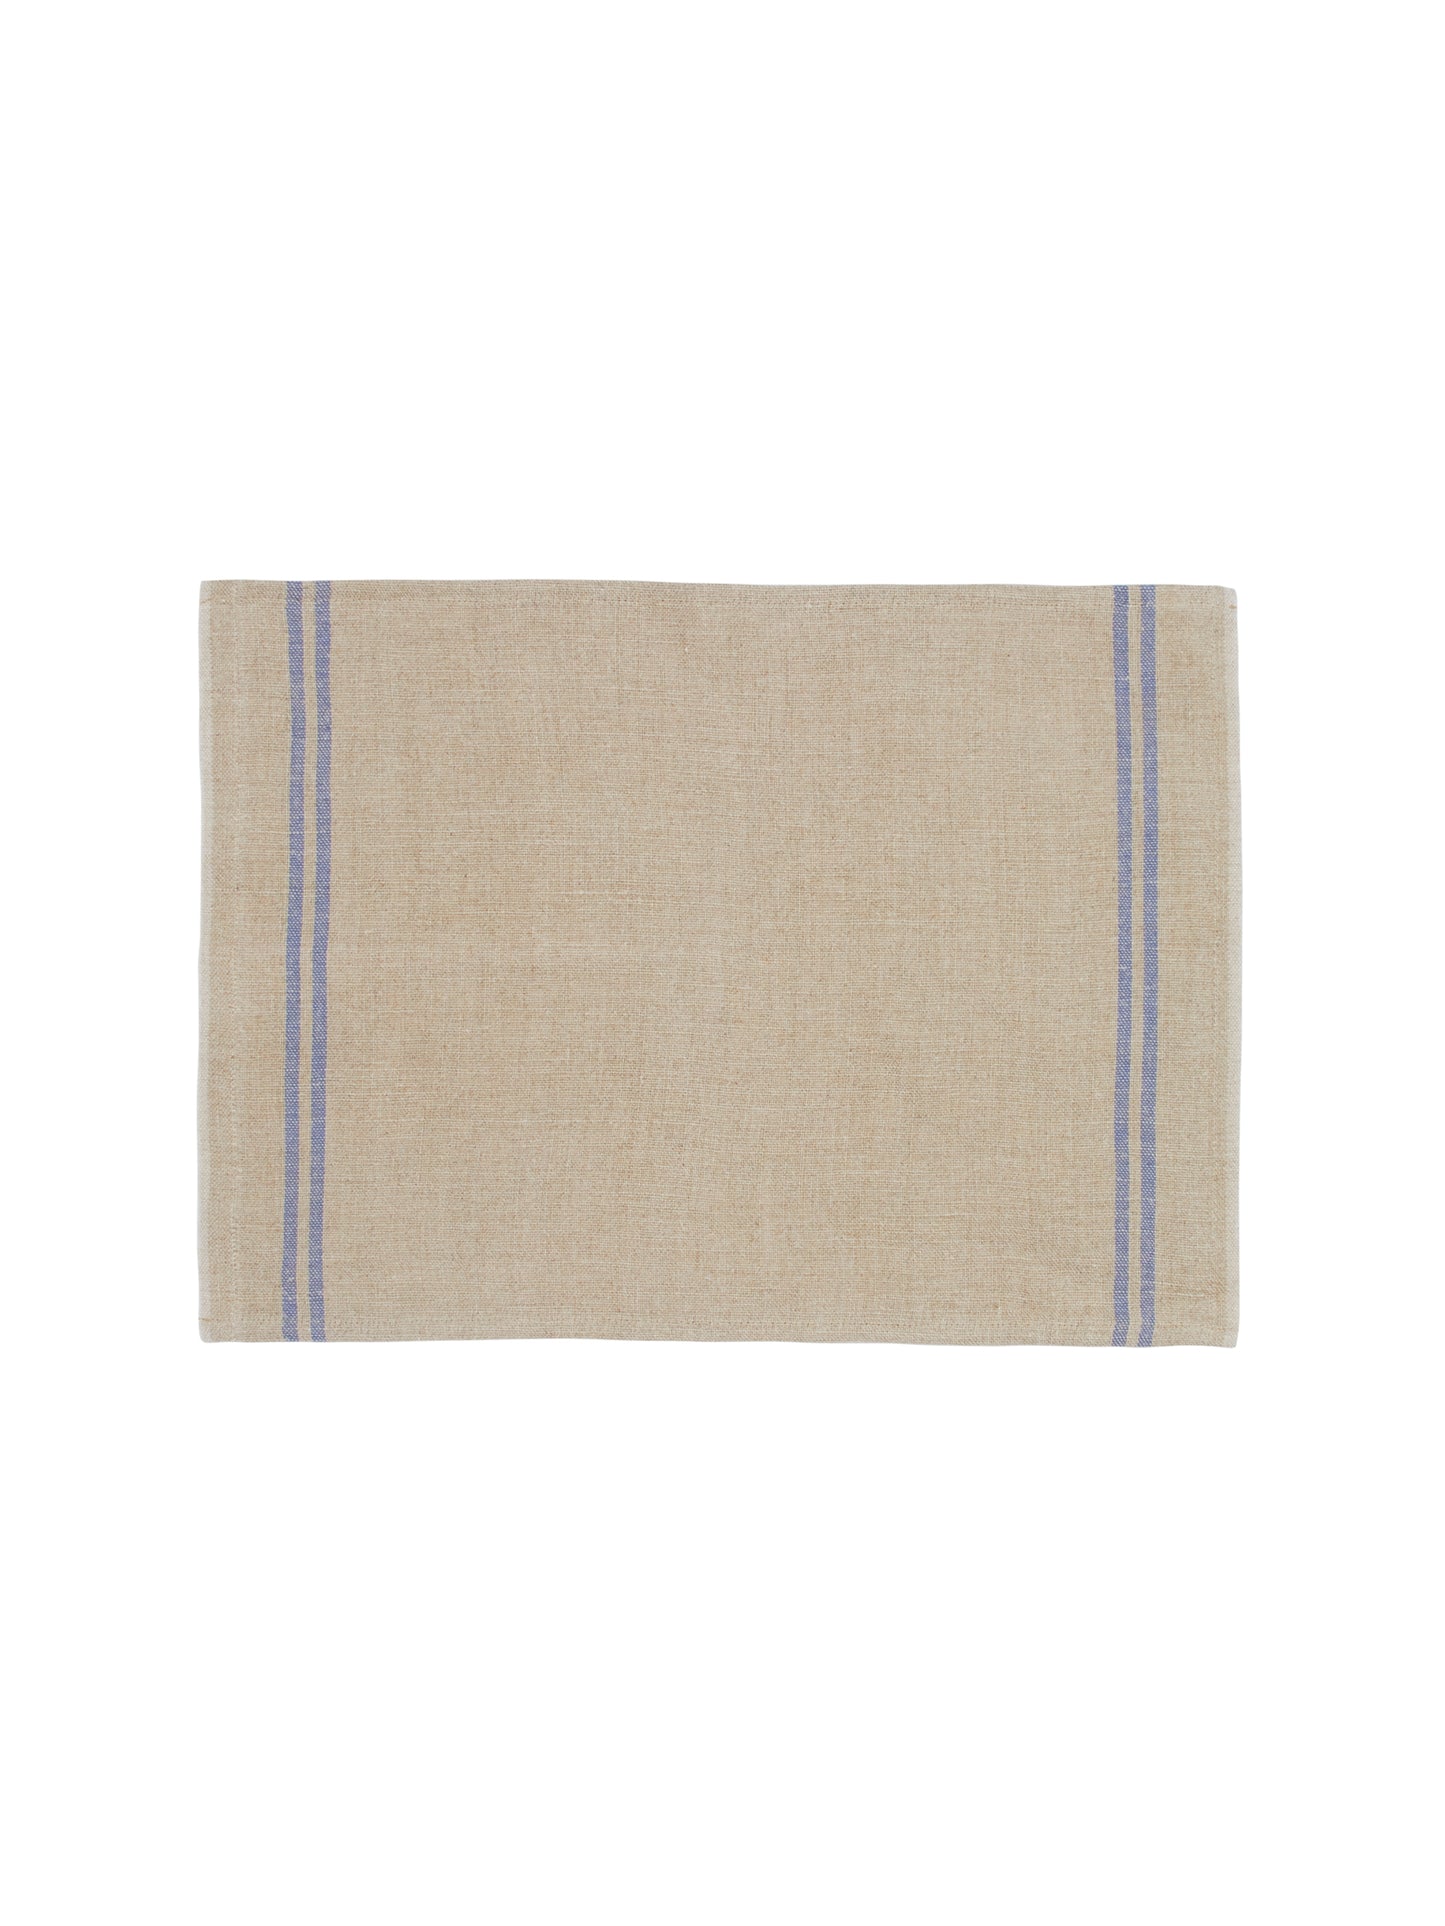 Charvet Editions Country Linen Collection Blue Placemats Weston Table